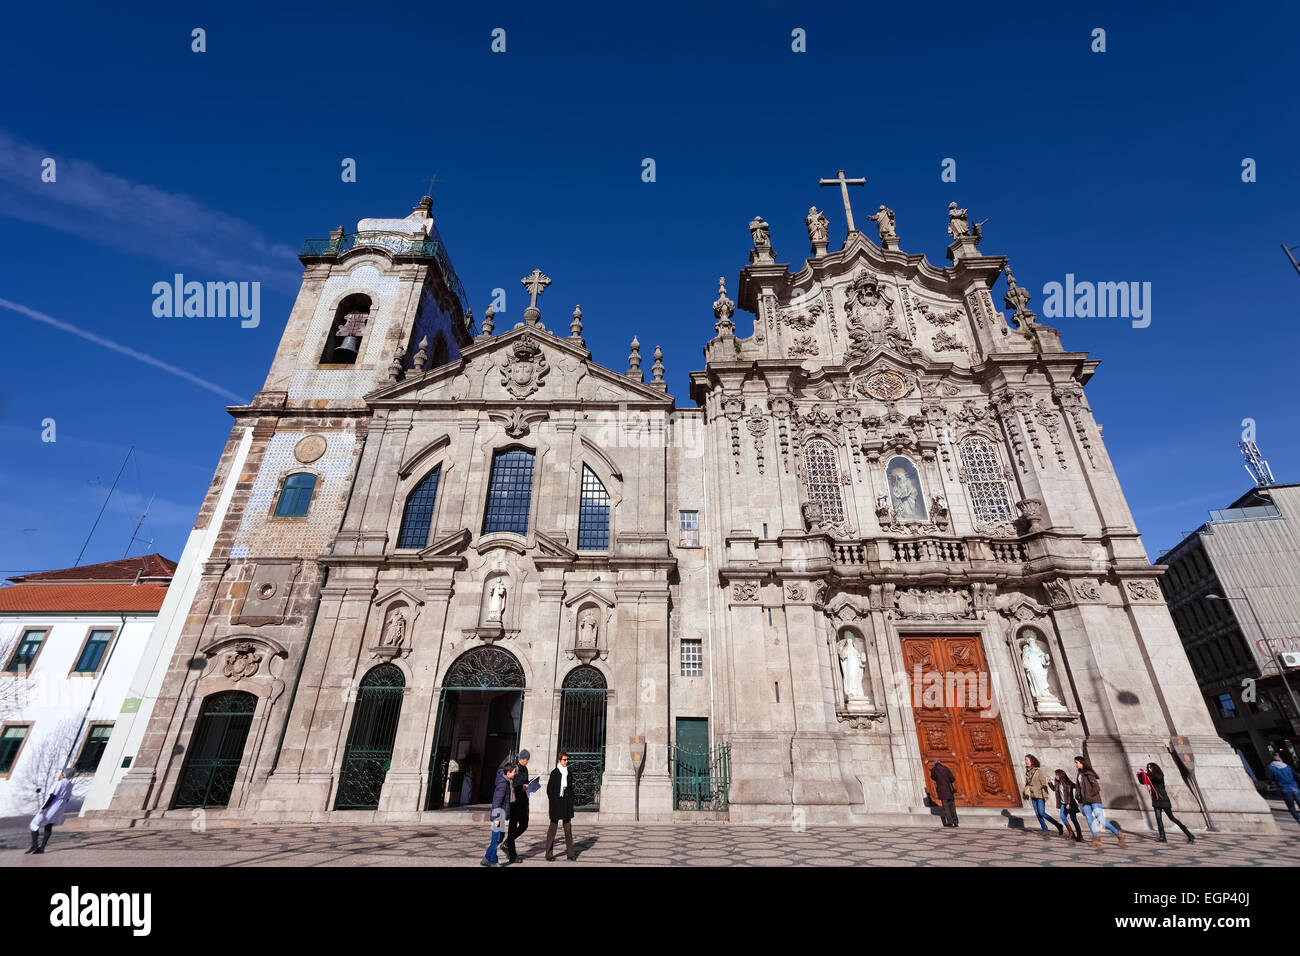 Porto, Portugal. December 29, 2015: Carmelitas Church on the left, Mannerist and Baroque styles, and Carmo Church at the right Stock Photo